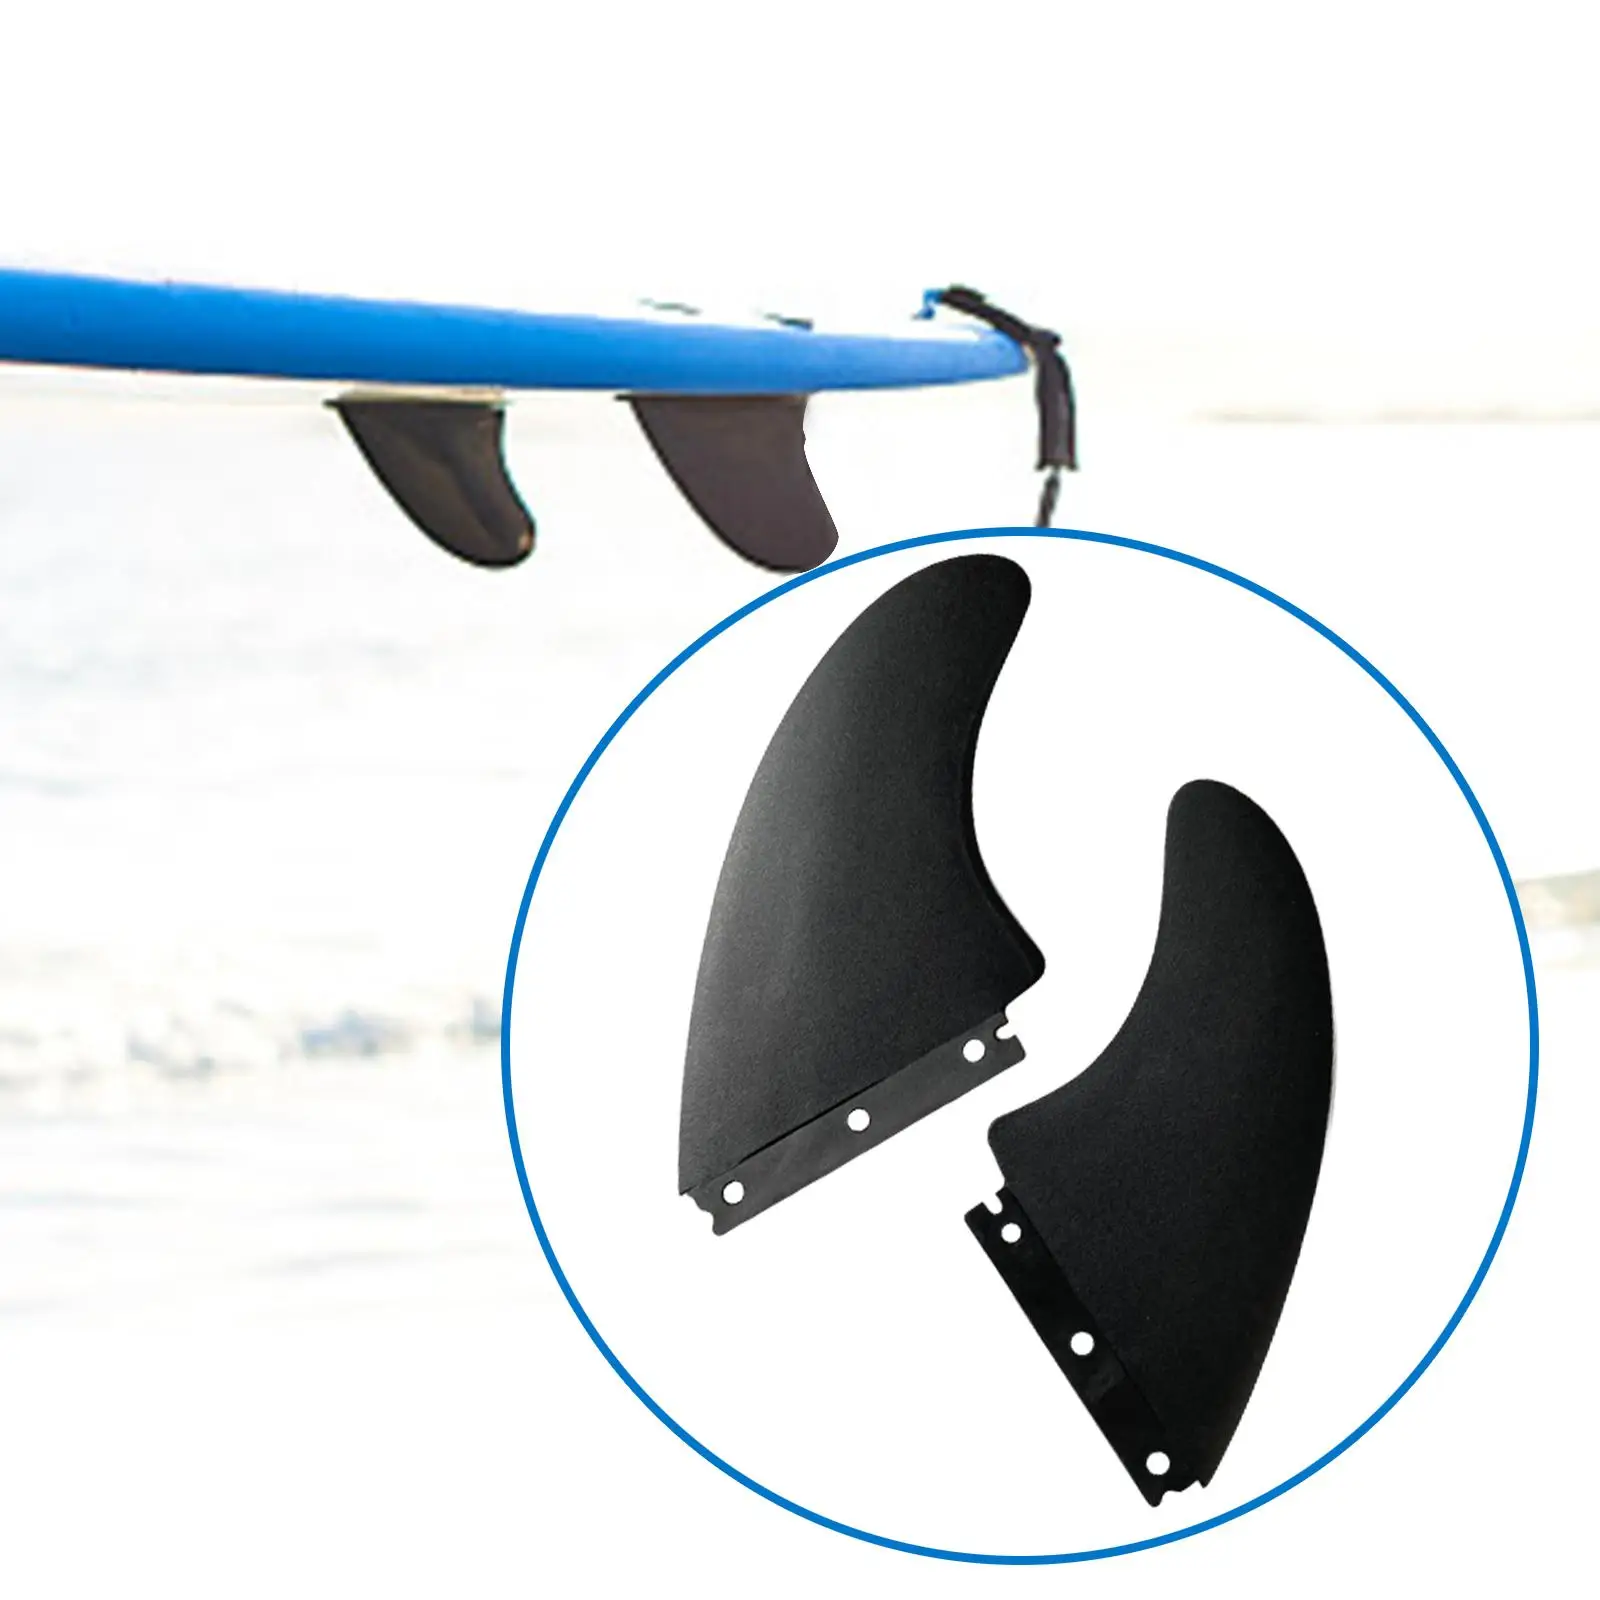 2x Surfboard Fin Replacement Water Distributor Quick Release Easy Installation Durable for Surfboard Boat Paddleboard